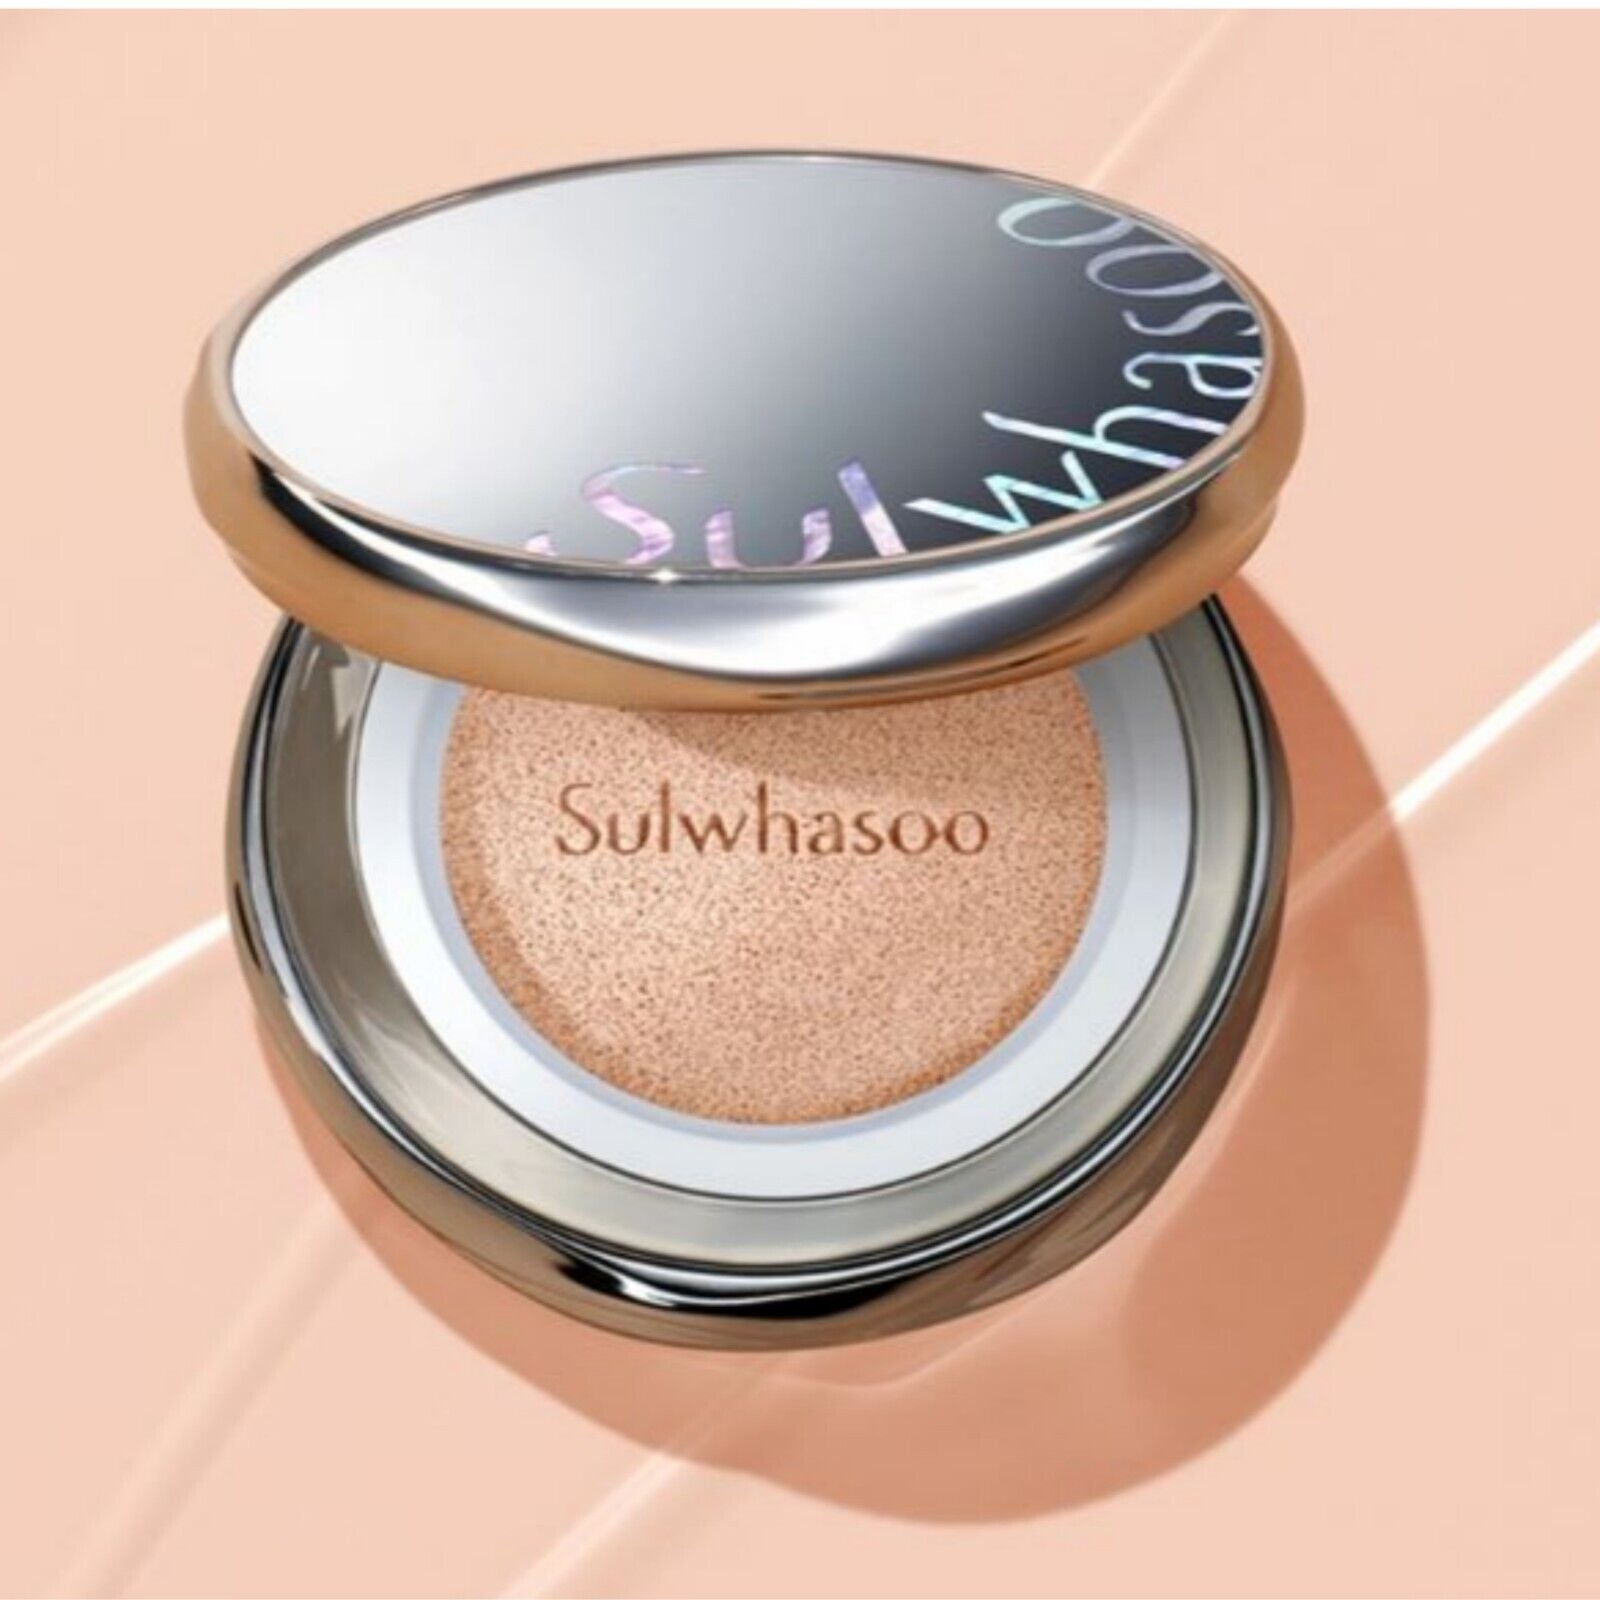  Get the stunning Sulwhasoo mineral eye shadow in golden shade. Refill for Sulwhasoo Perfecting Cushion Airy 15g.